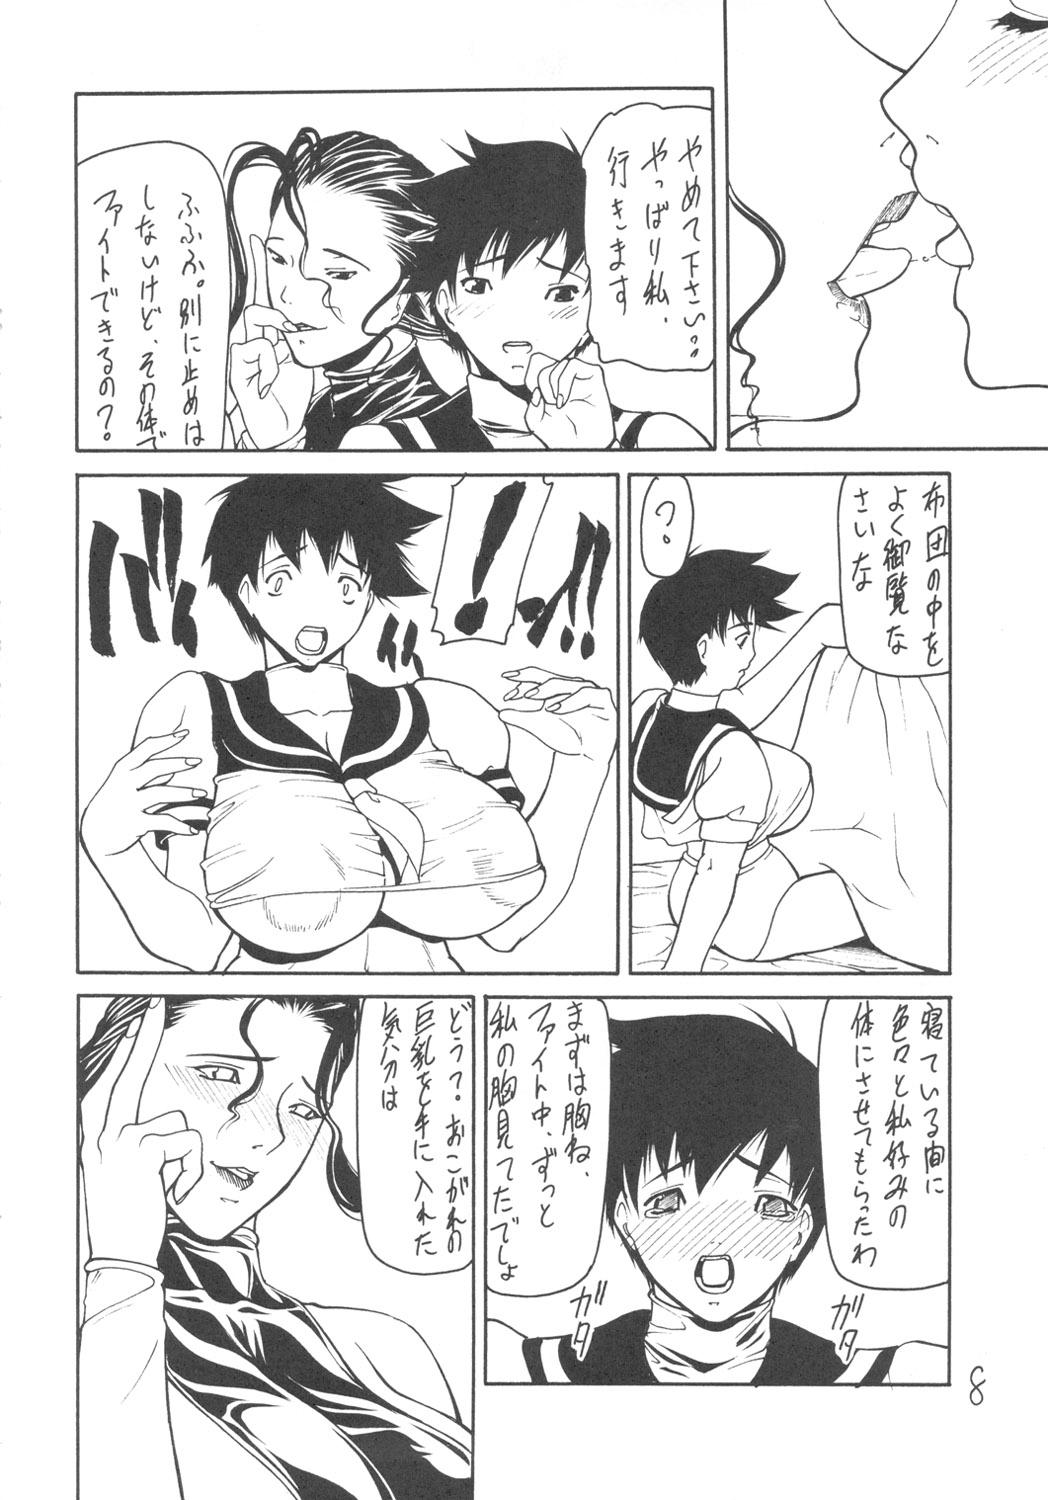 Toying Giroutei "Ho" no Maki - Street fighter Fingers - Page 6